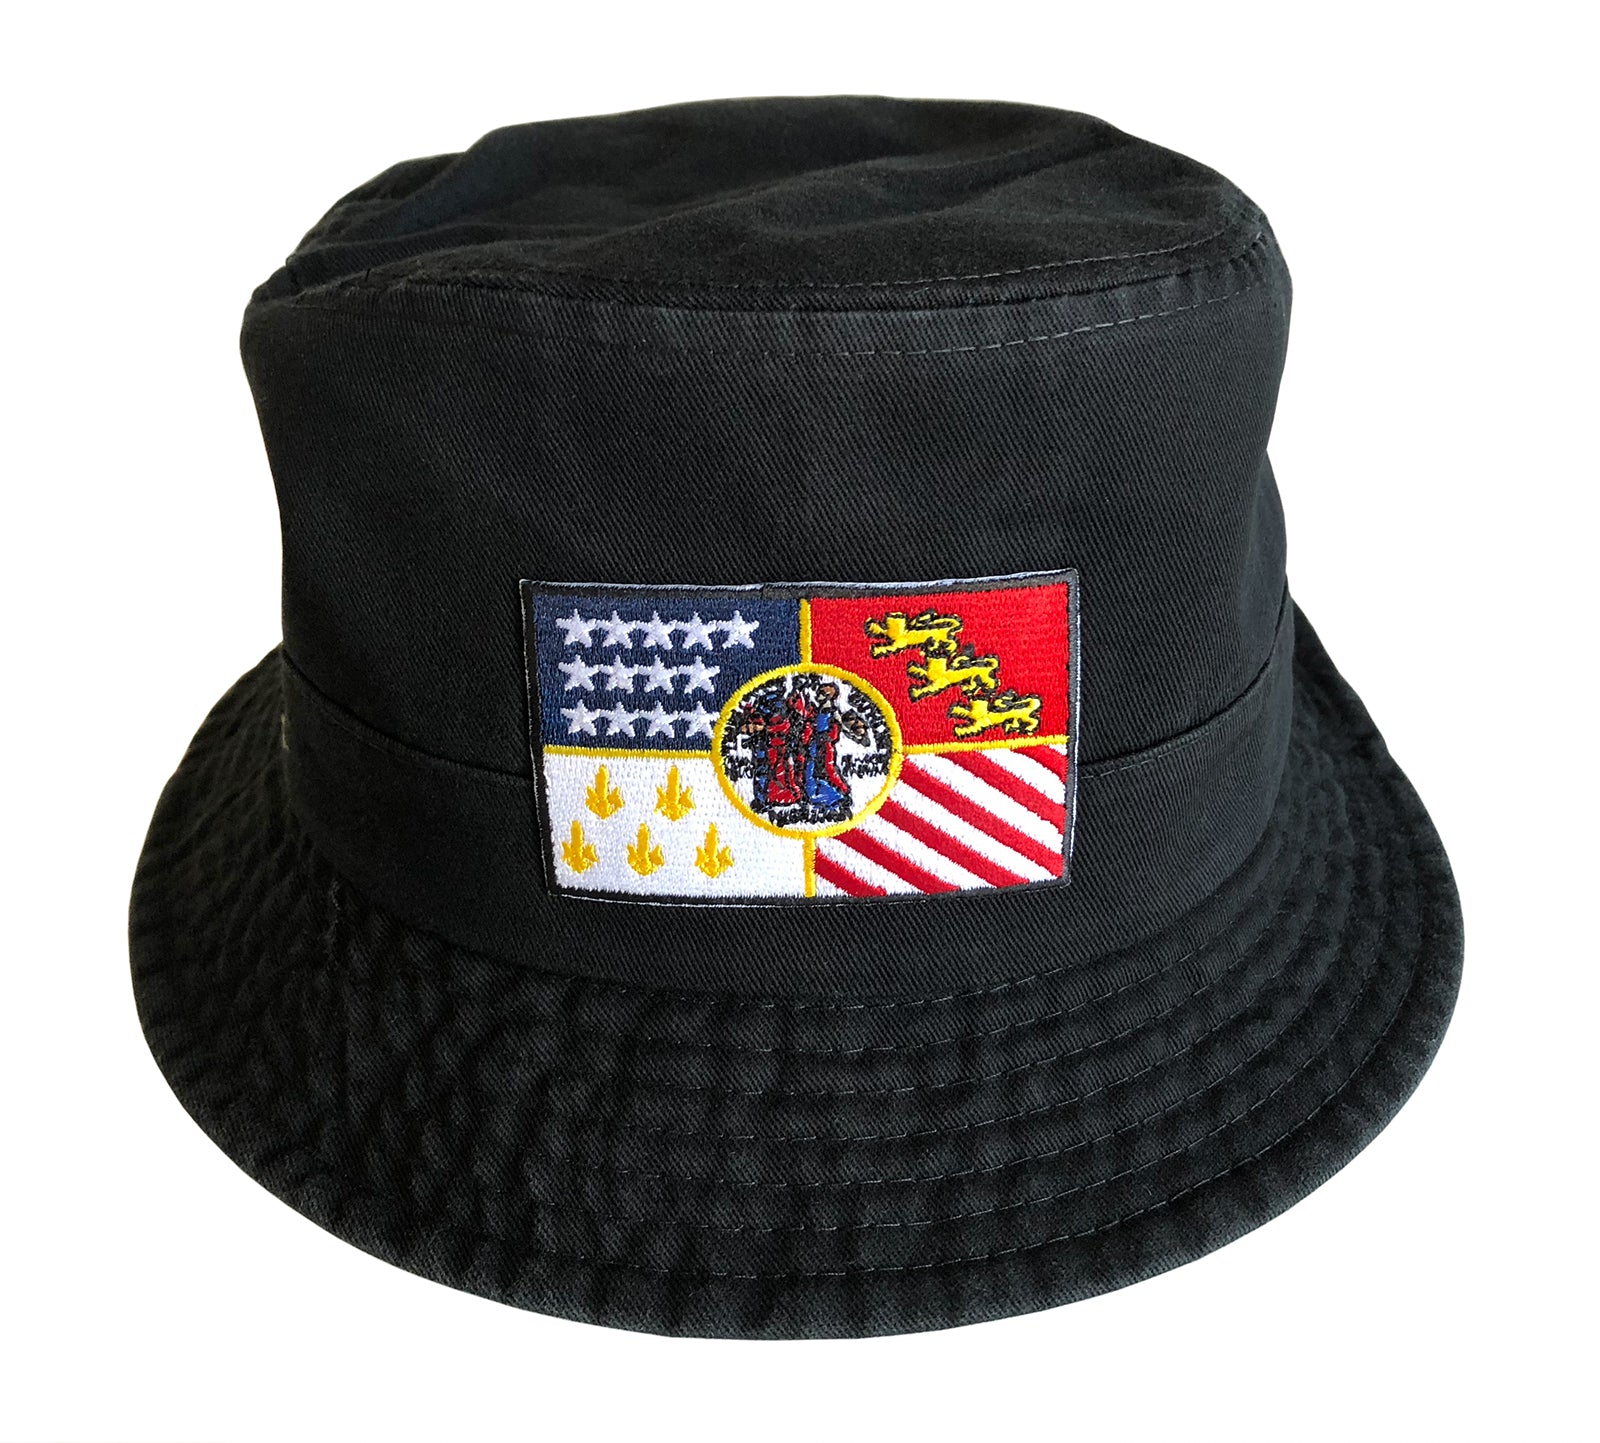 Detroit City Flag Bucket Hat, by Well Done Goods